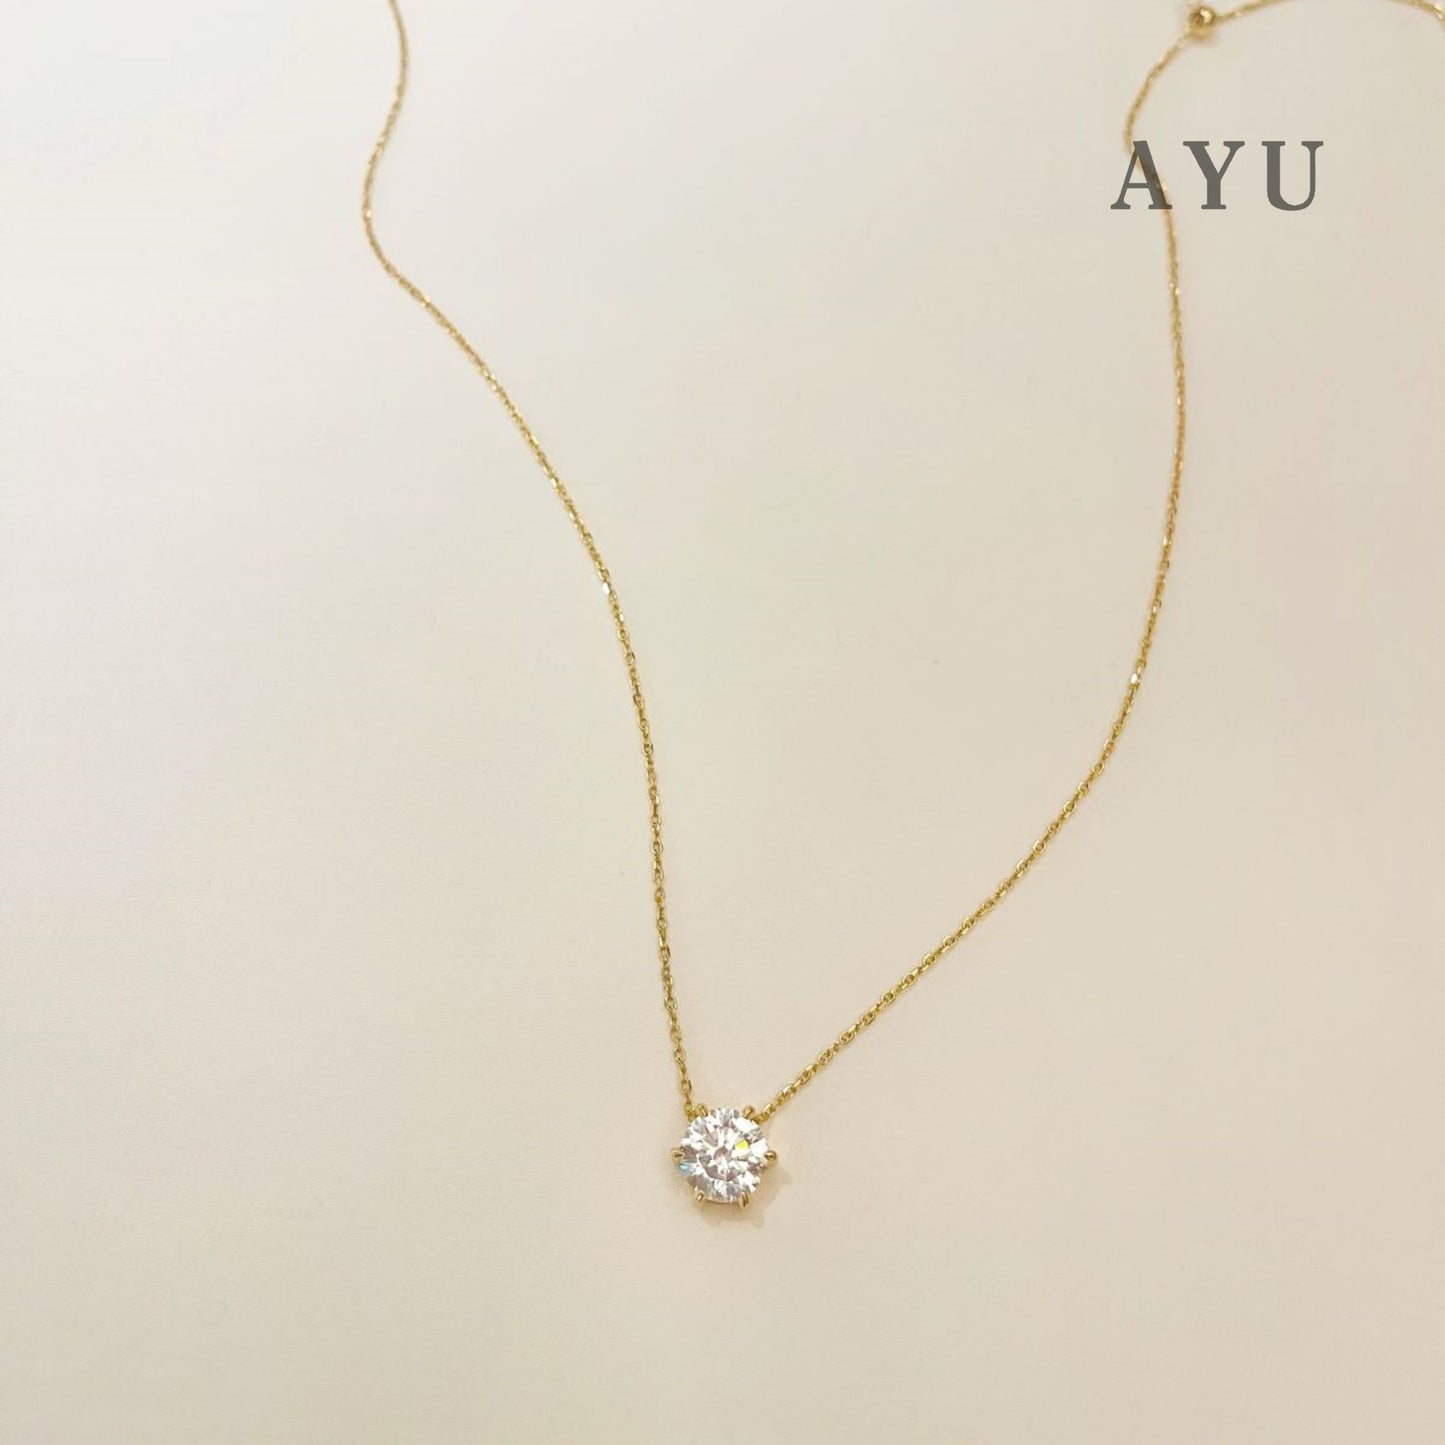 AYU Gigi Glam 6 Prong With Adjustable Chain Necklace 16k Yellow Gold